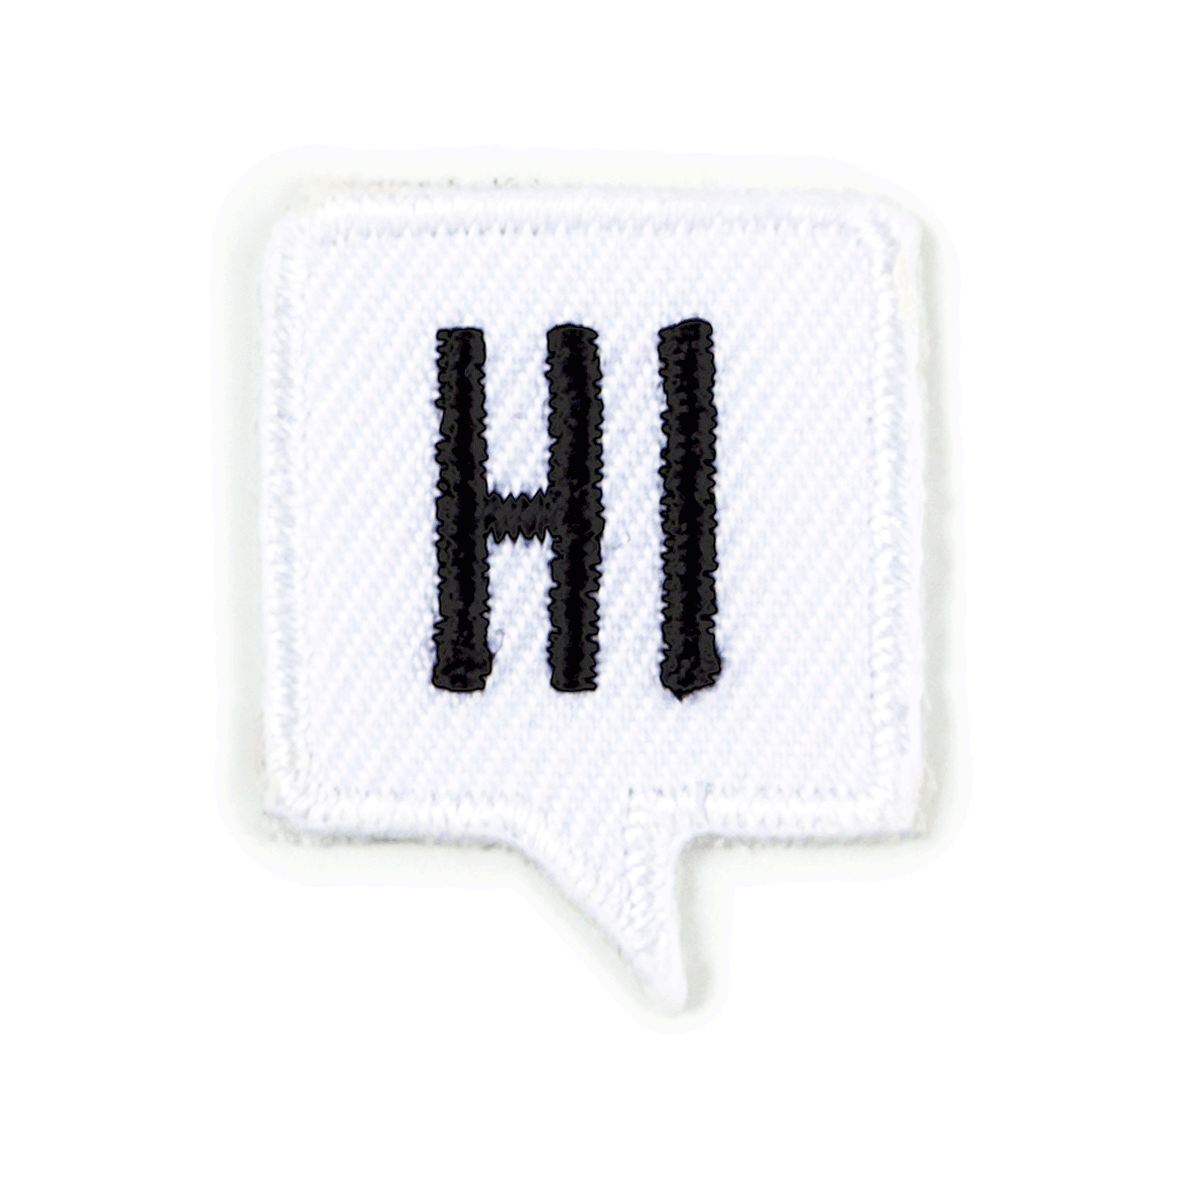 Hi Embroidered Sticker Patch - homesewn